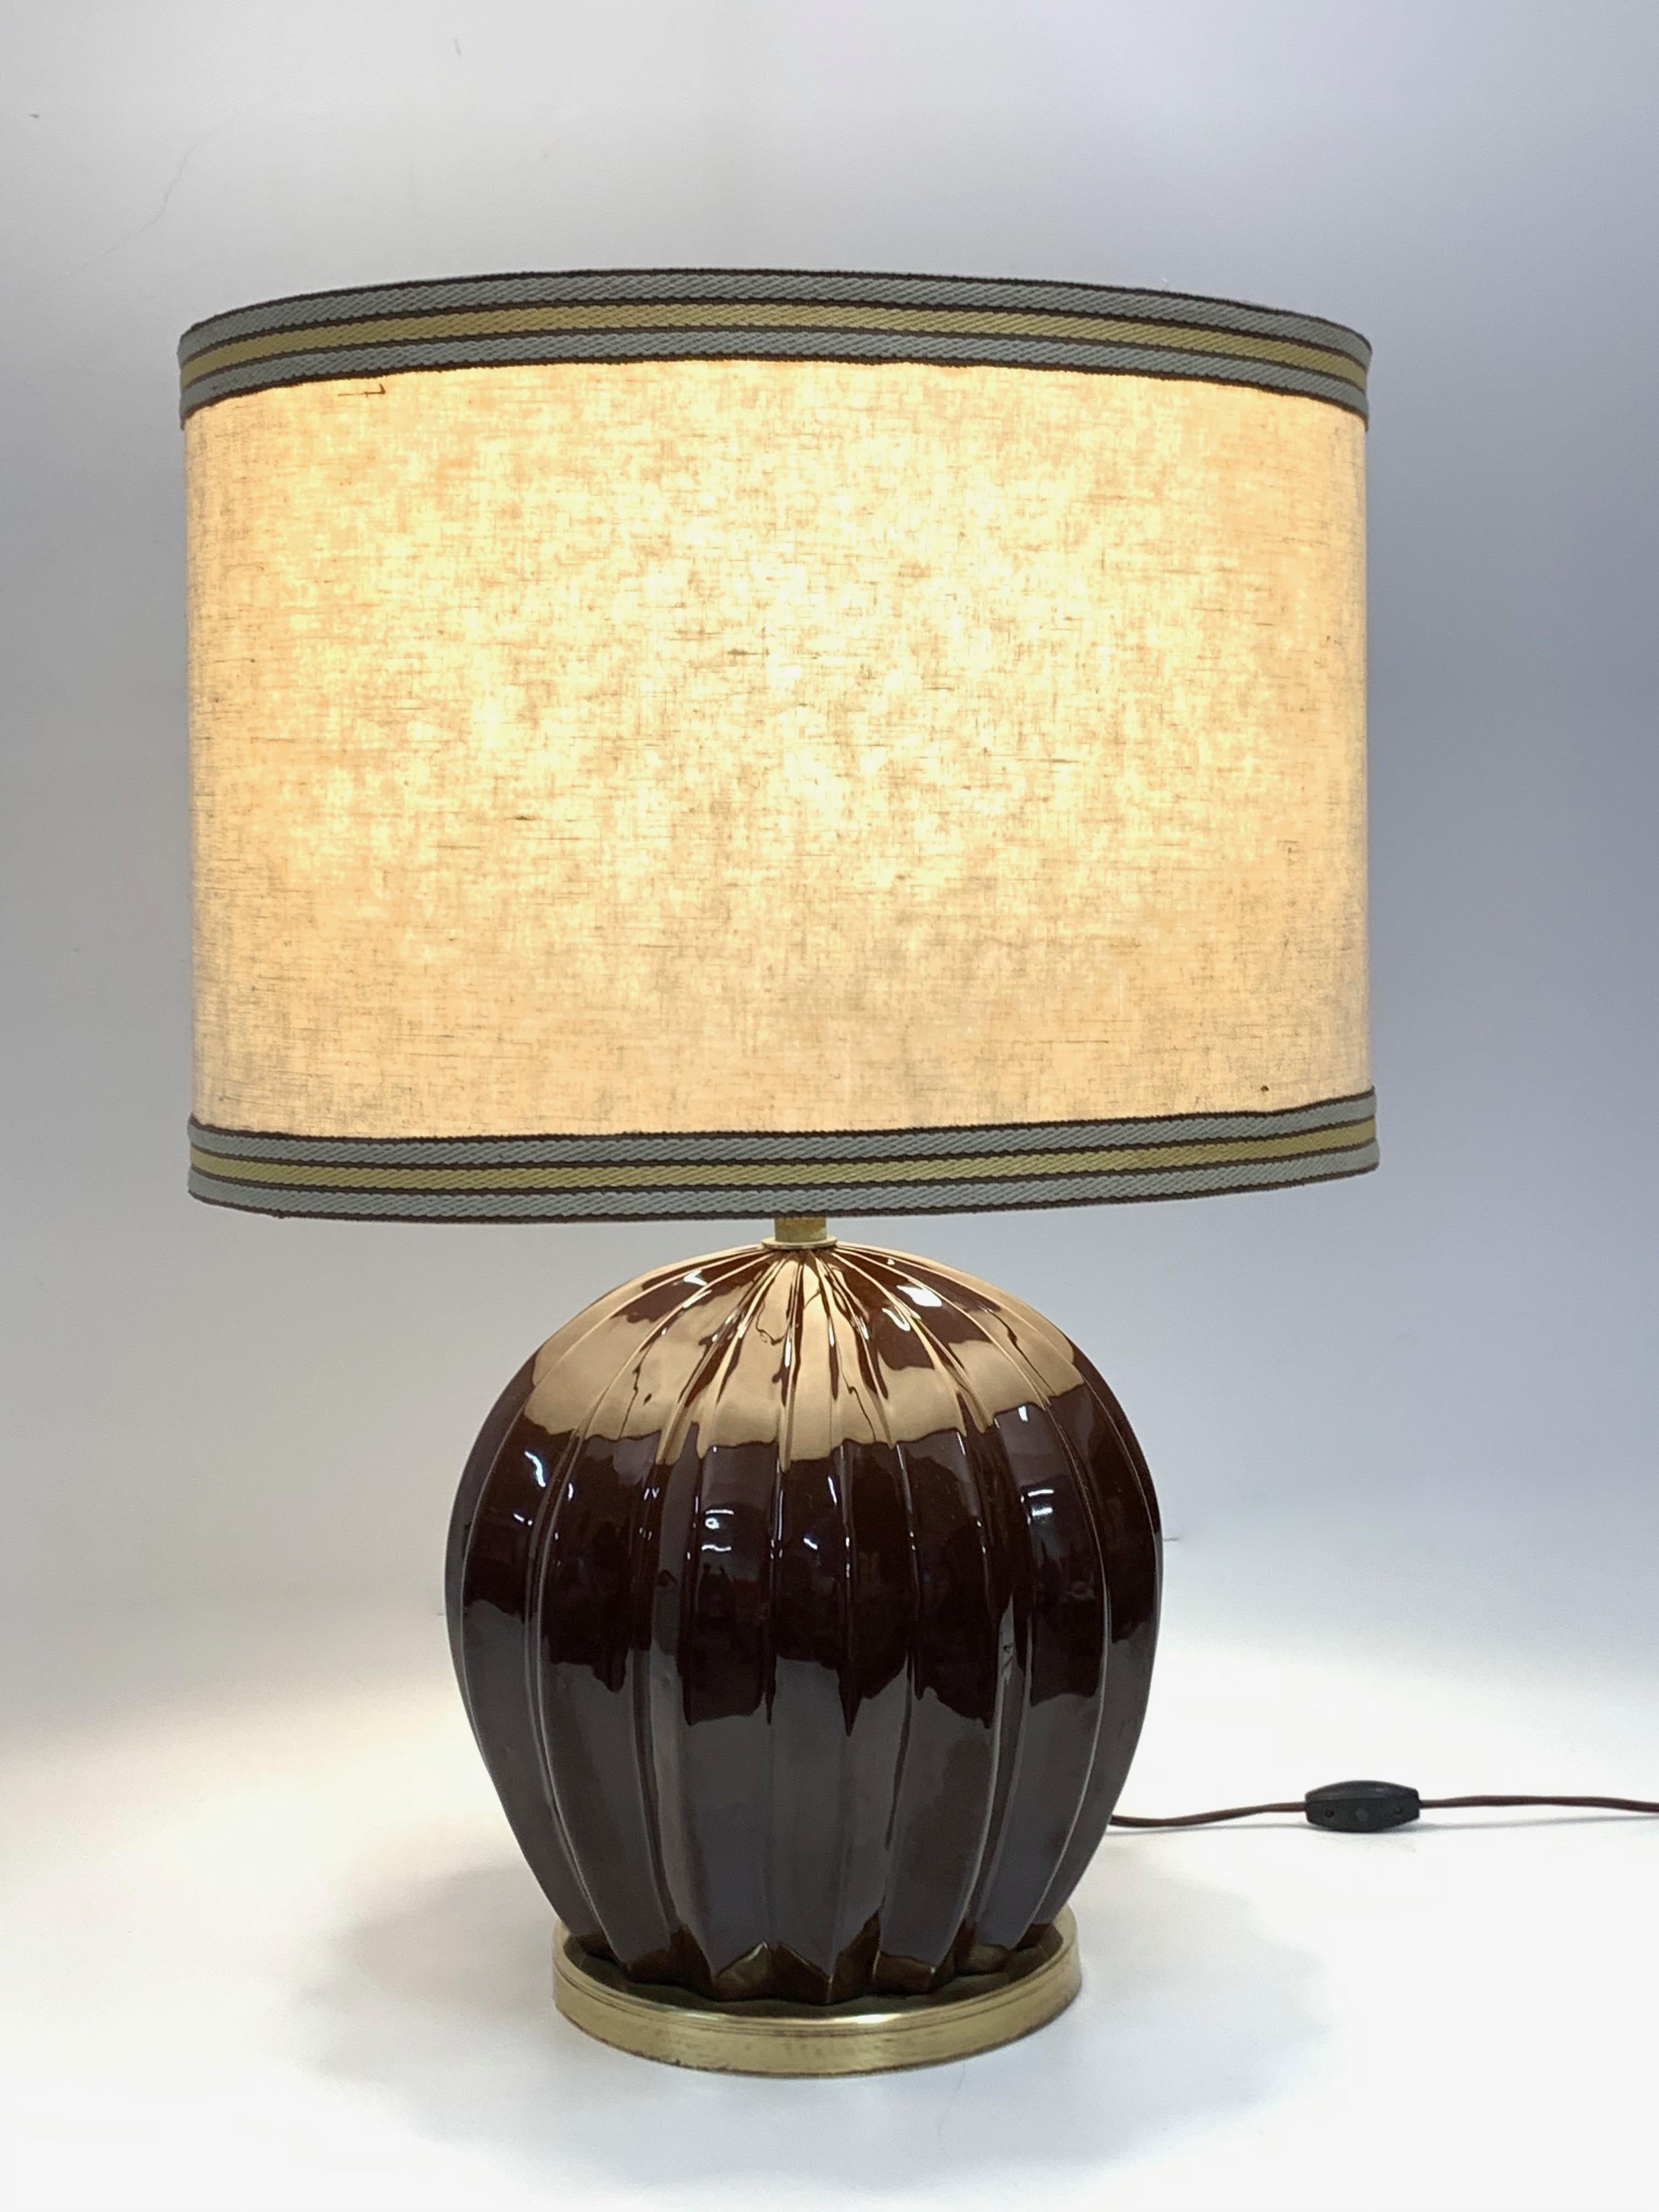 Iconic and large midcentury brown glazed ceramic lamp with white fabric shade. It was produced in Italy during 1970s and it is attributed to Tommaso Barbi.

The brown ceramic body with its lines, reminding cloves, and its brass like base, it is a